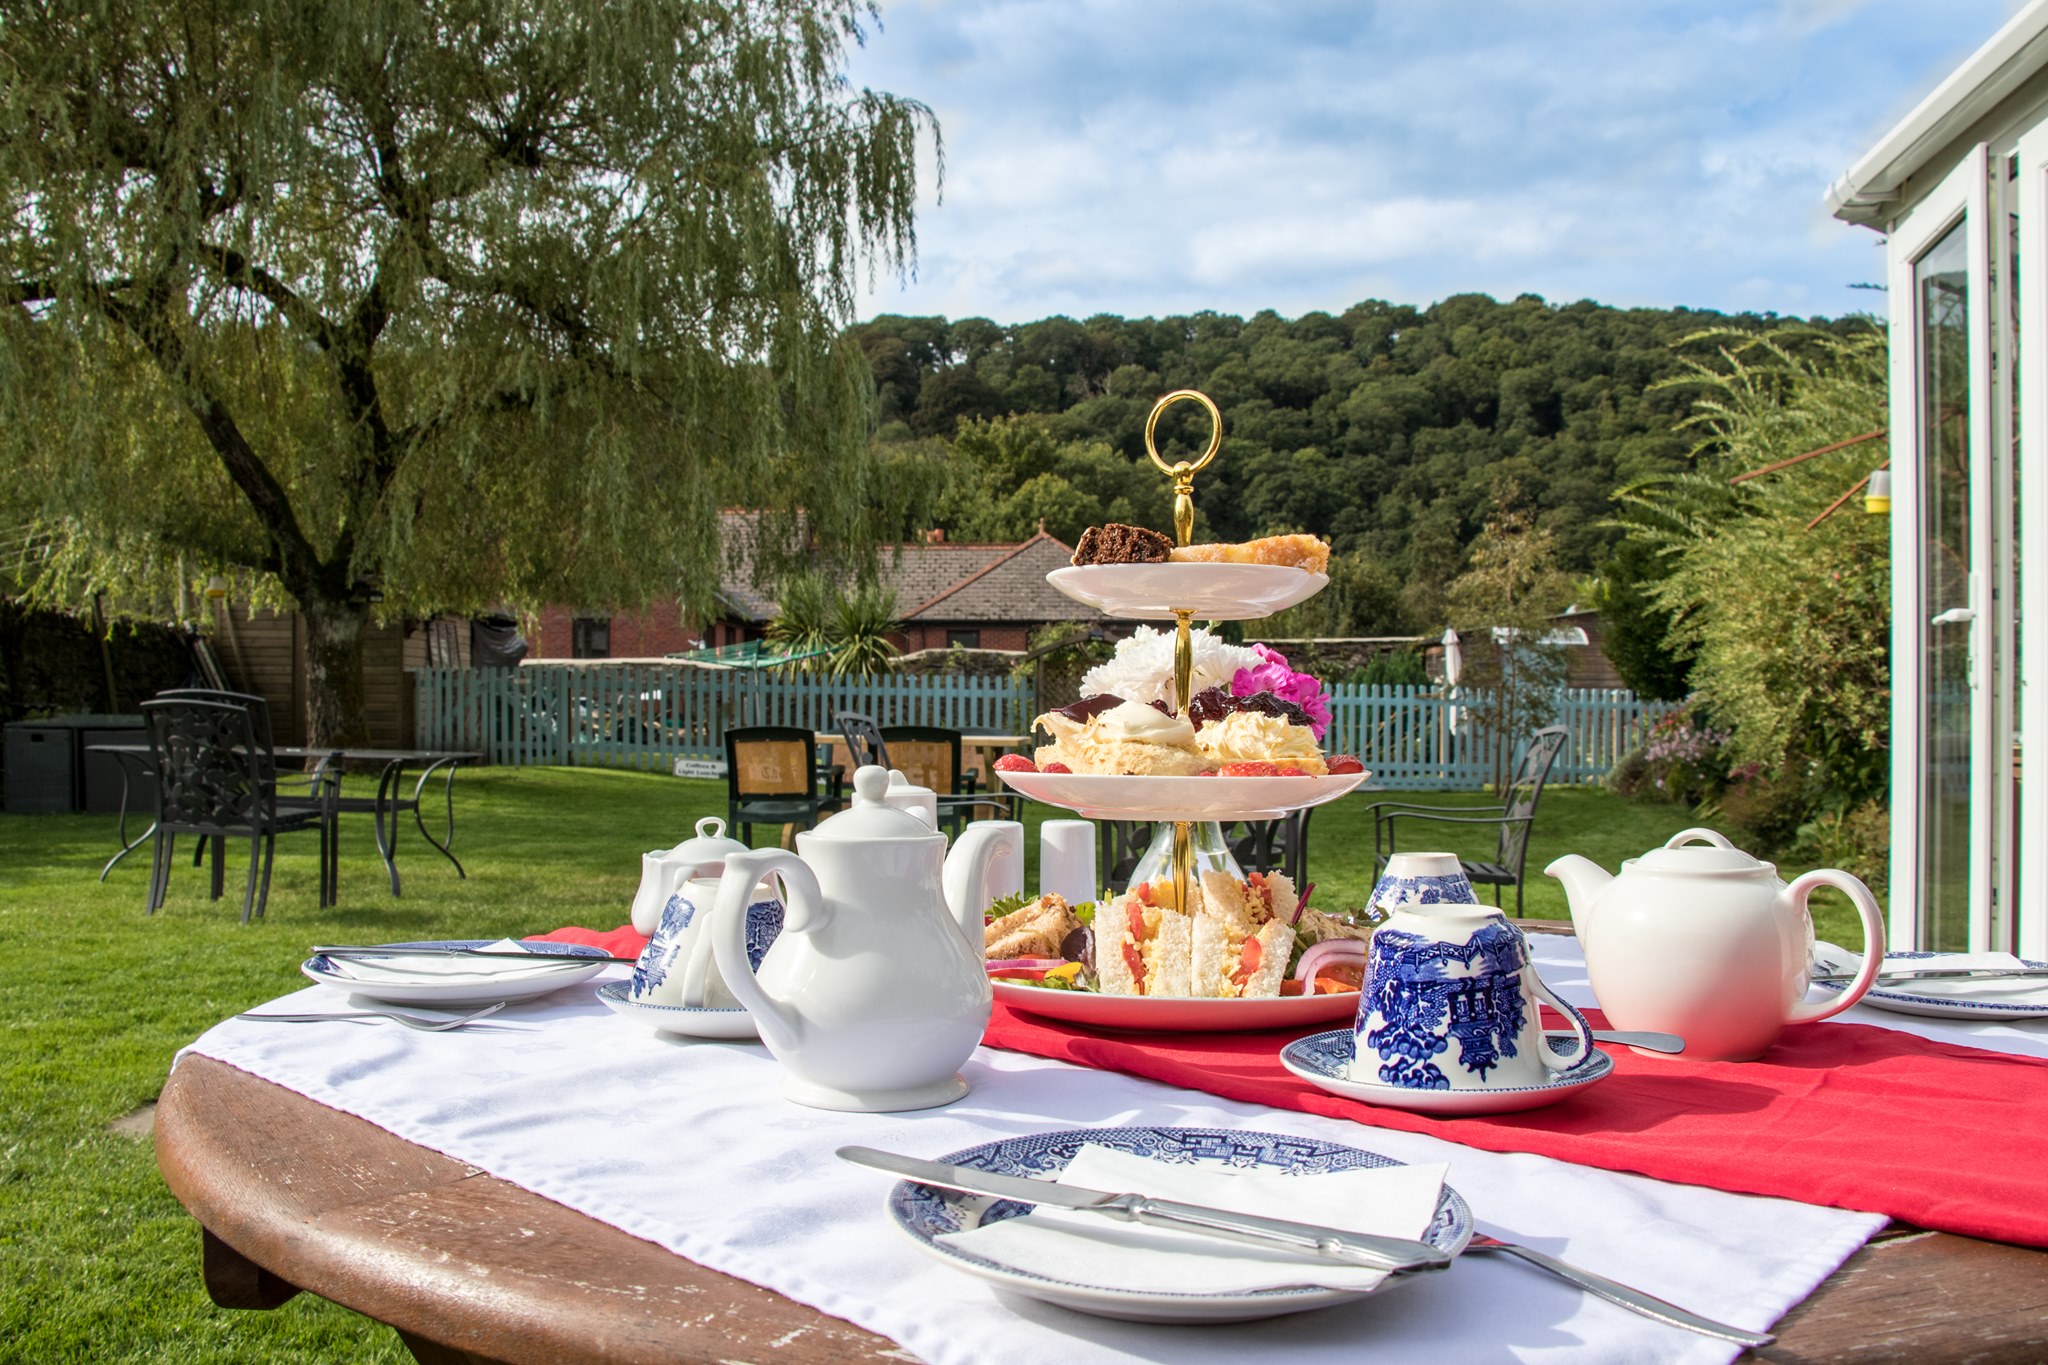 The Copper Kettle Cream Tea Outside in the garden with sandwiches, scones & a view of a pretty garden behind the table with cute china pattern crockery